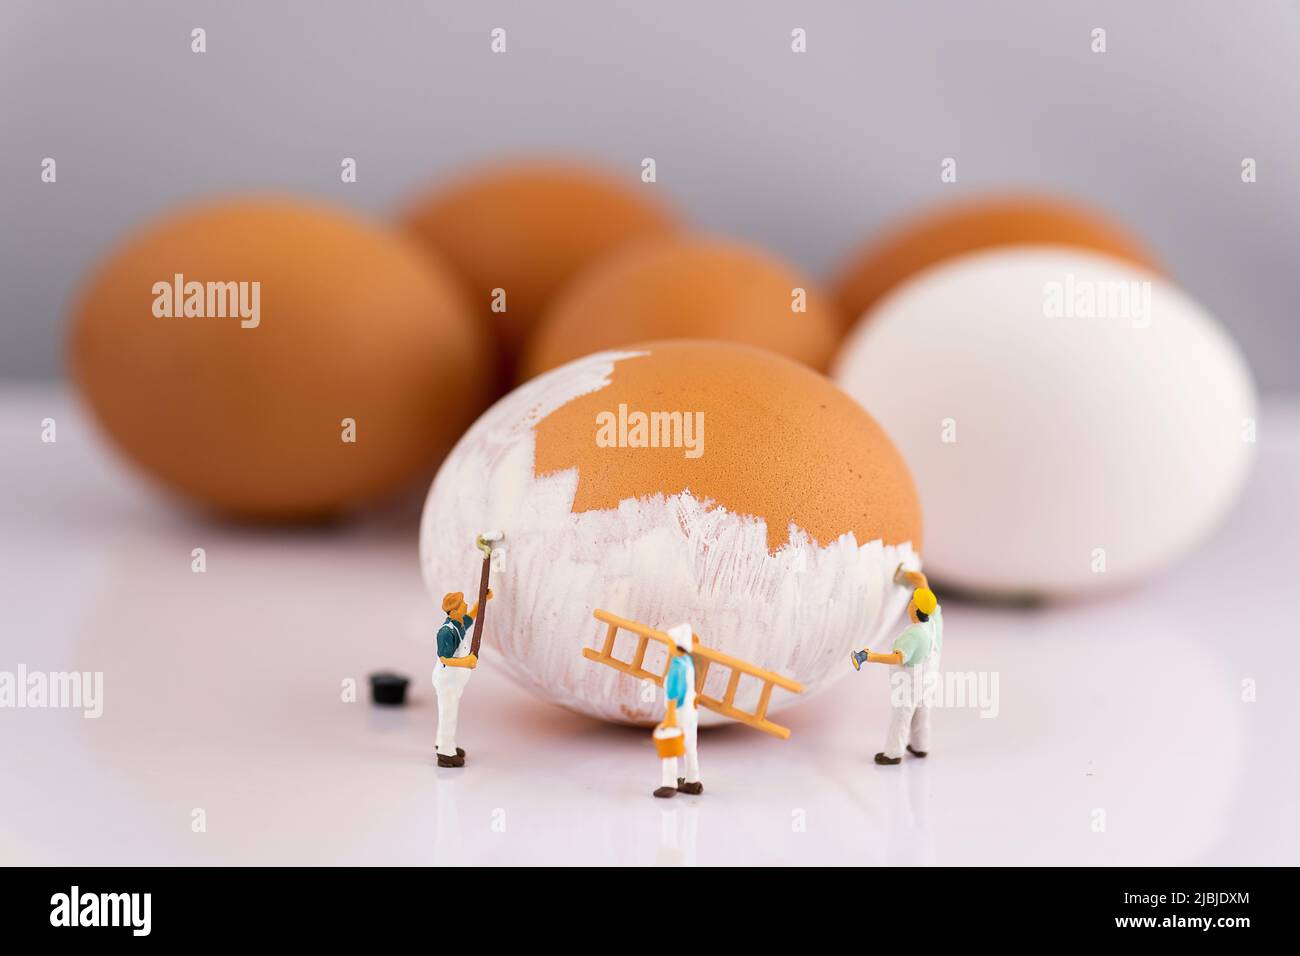 Miniature people small model human figure painting brown Eggs to white Stock Photo